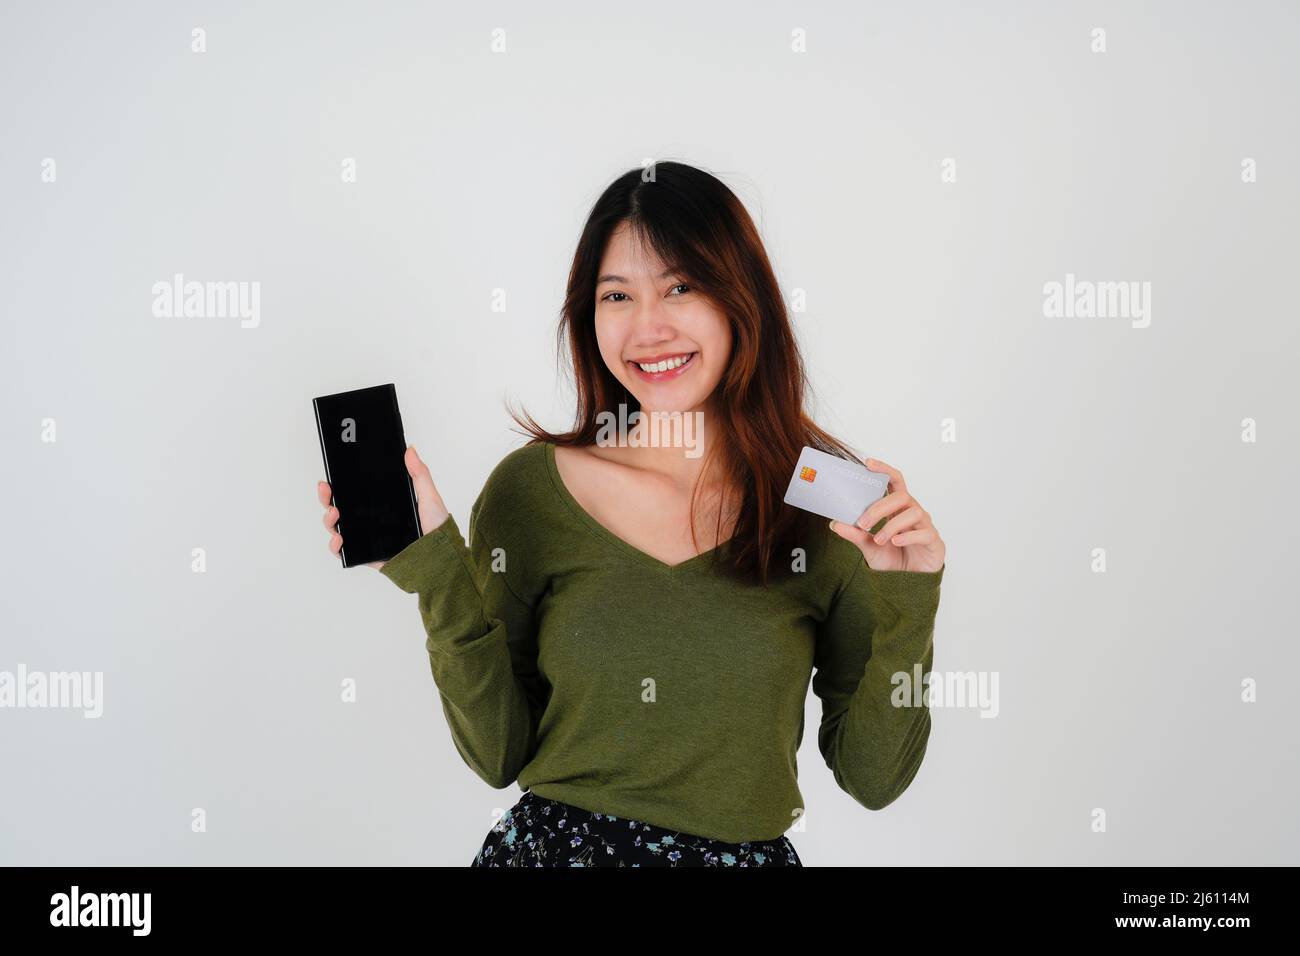 Image of a beautiful young pretty woman posing isolated over white wall background using mobile phone holding credit card. Stock Photo